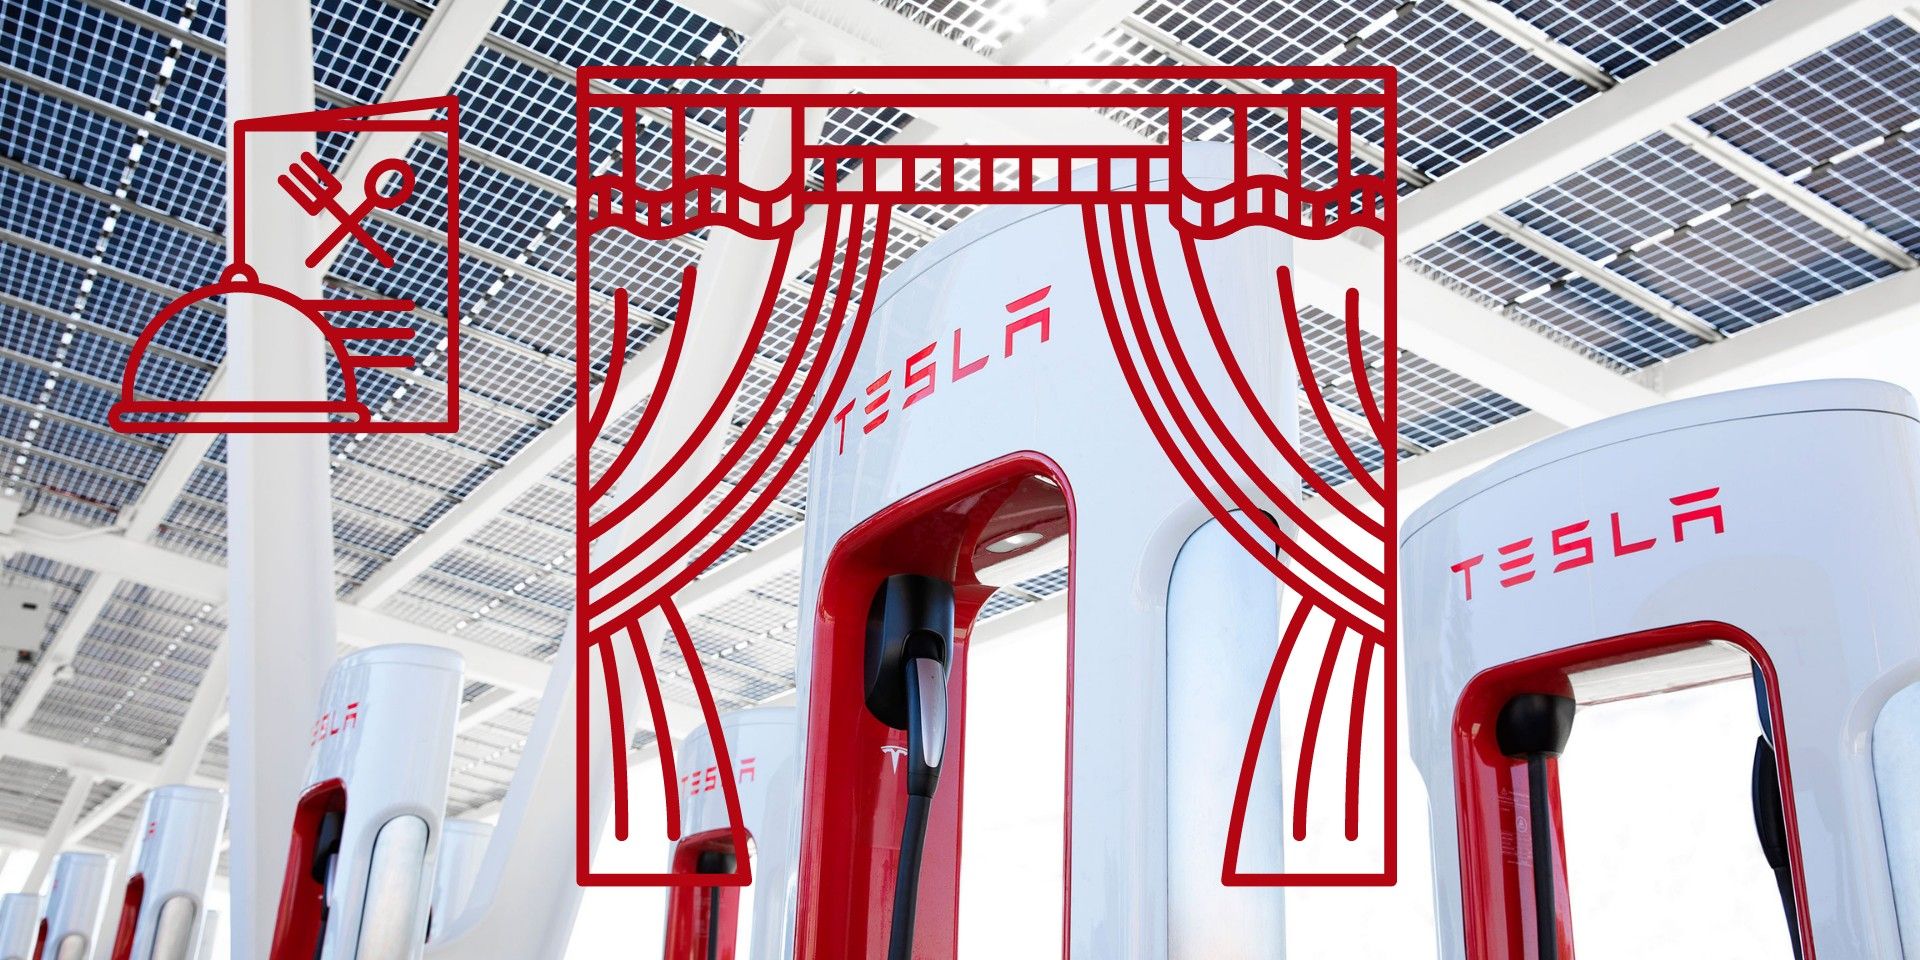 Tesla Diner_Drive-In Theater